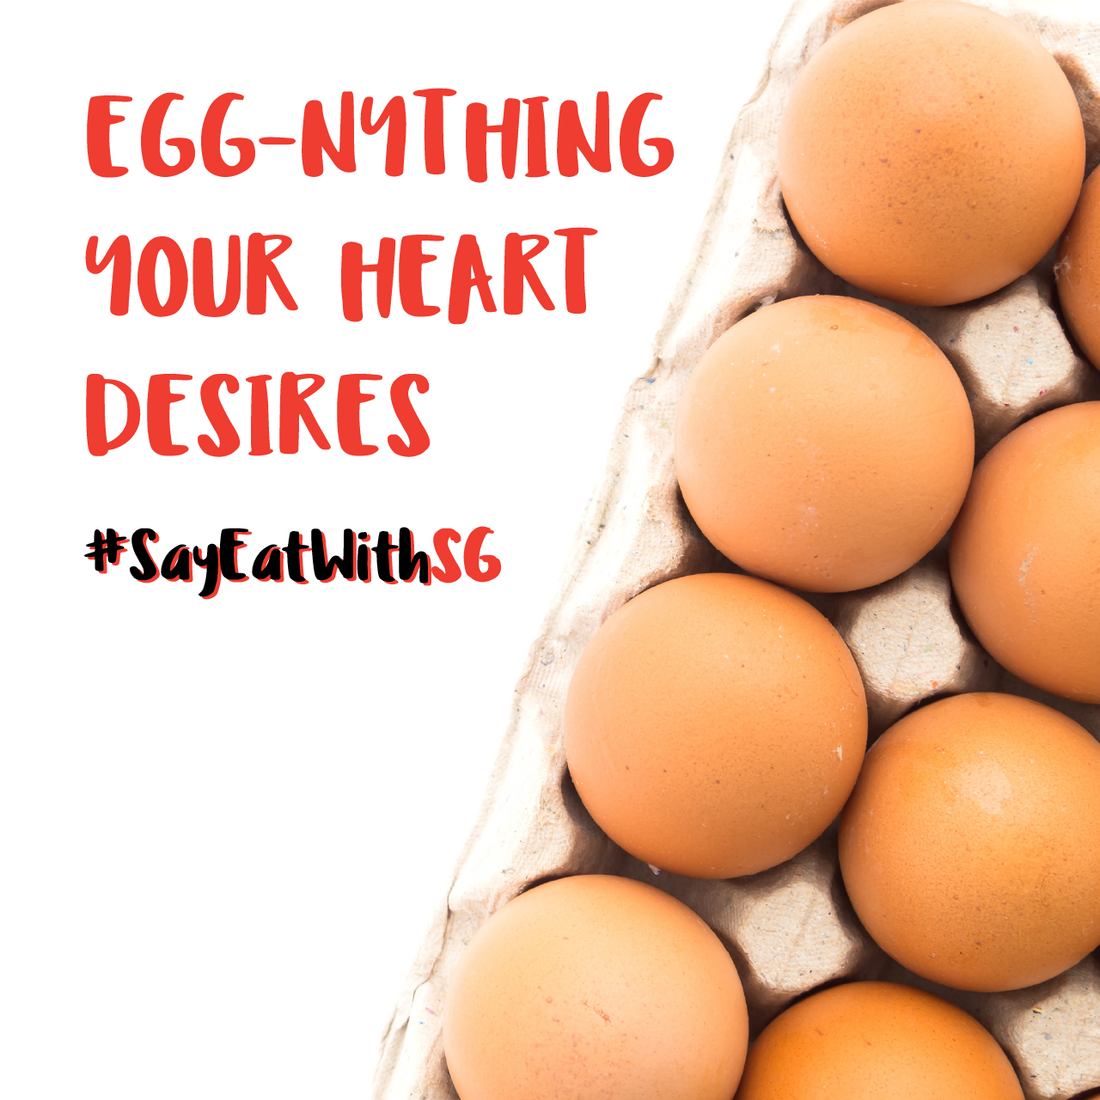 Egg-nything Your Heart Desires